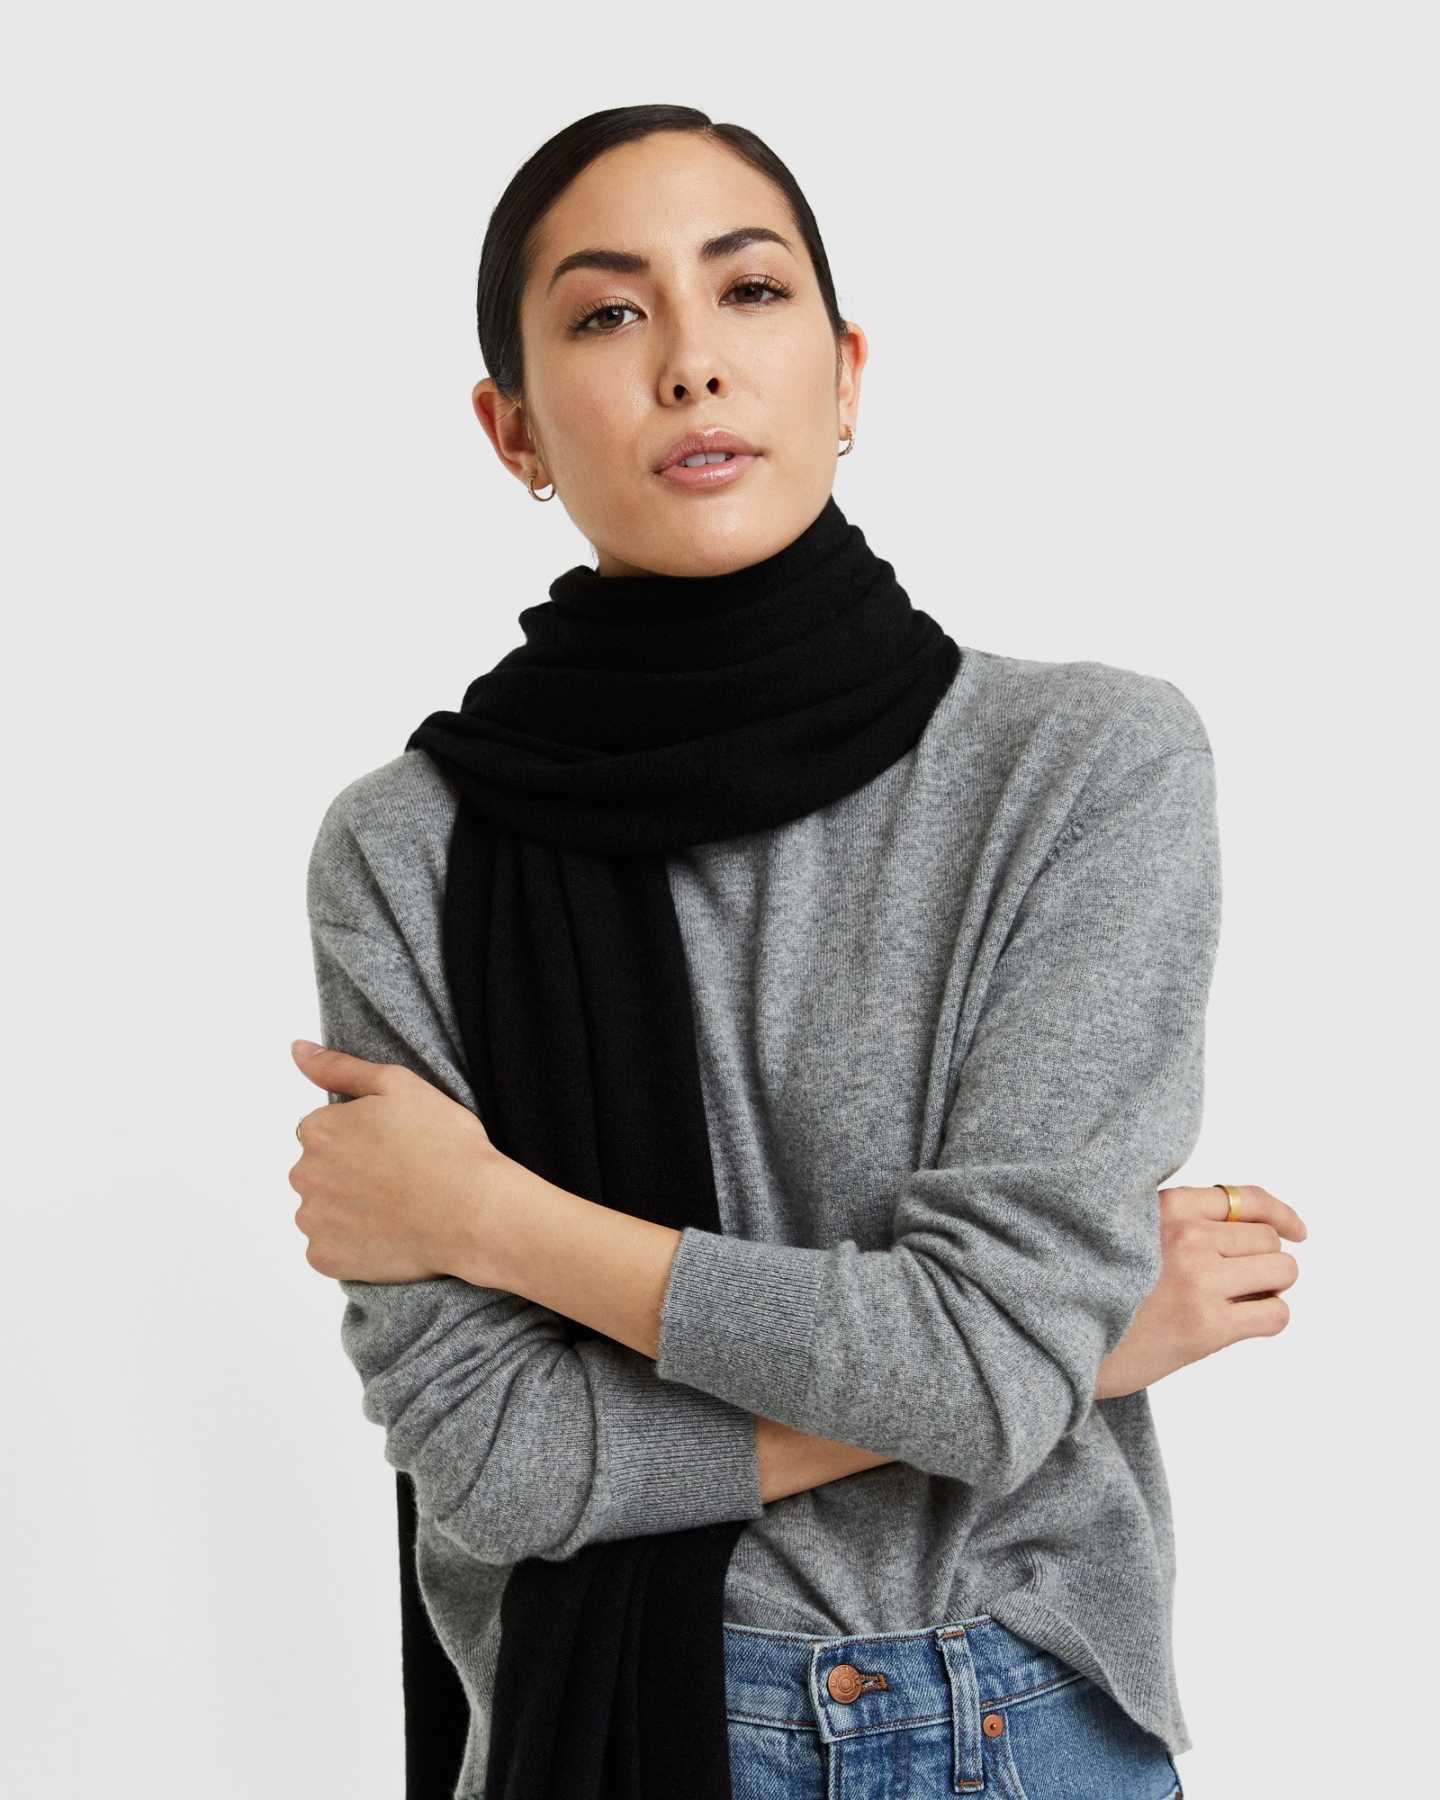 Cashmere wrap in black and grey cashmere sweater woman